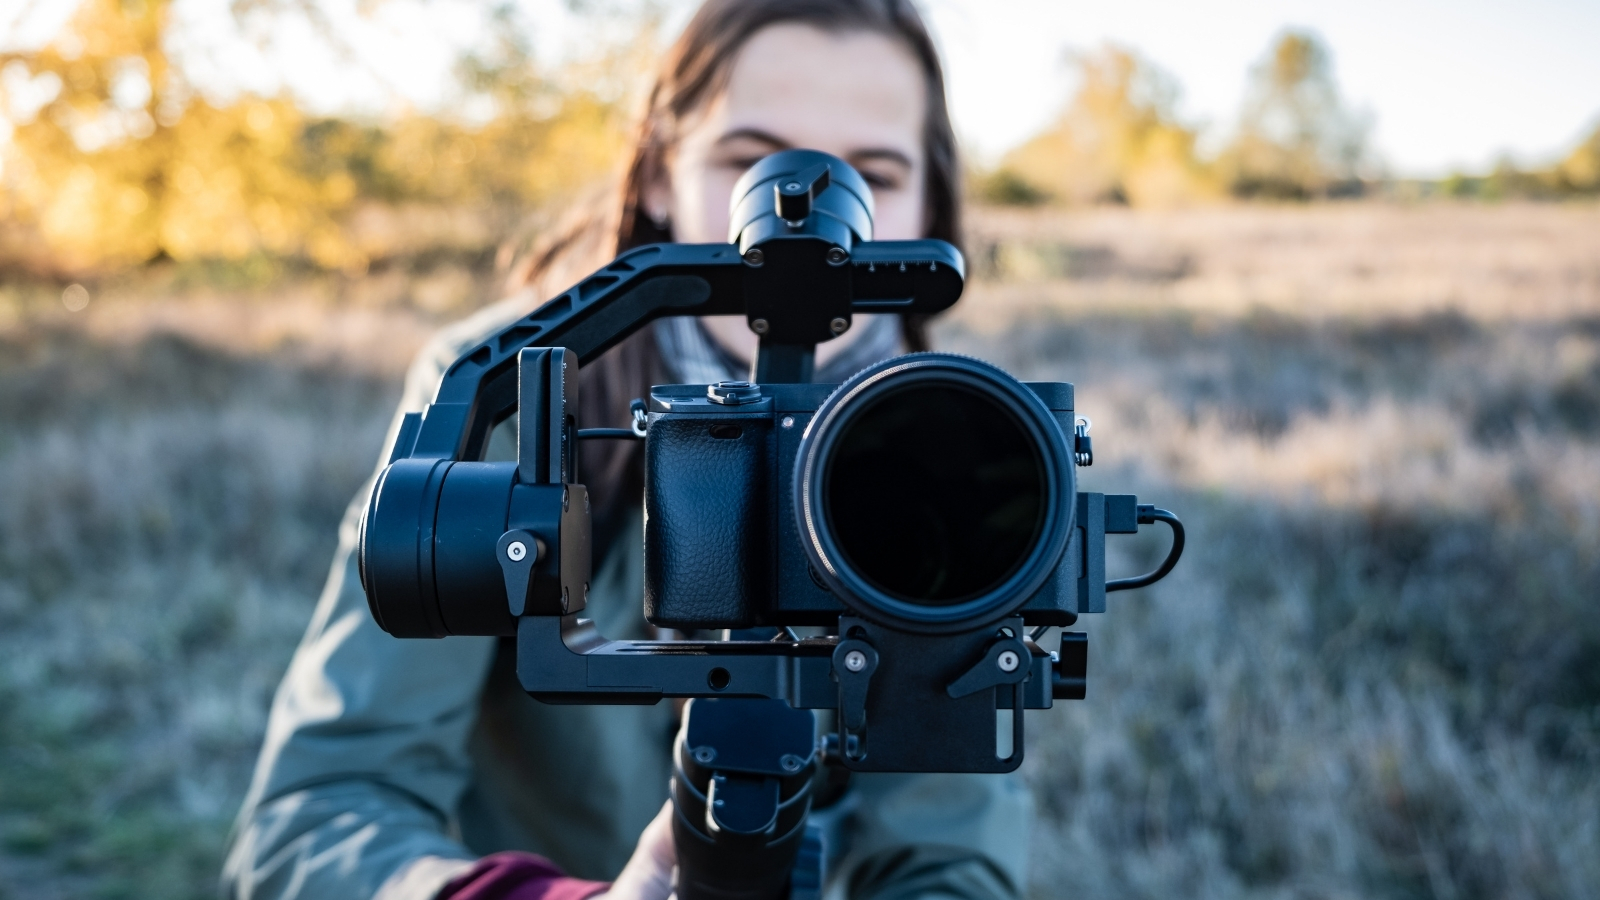 A person stands in a chilly field with a tree in the background, holding up a DSLR camera inside a handheld gimbal stabiliser